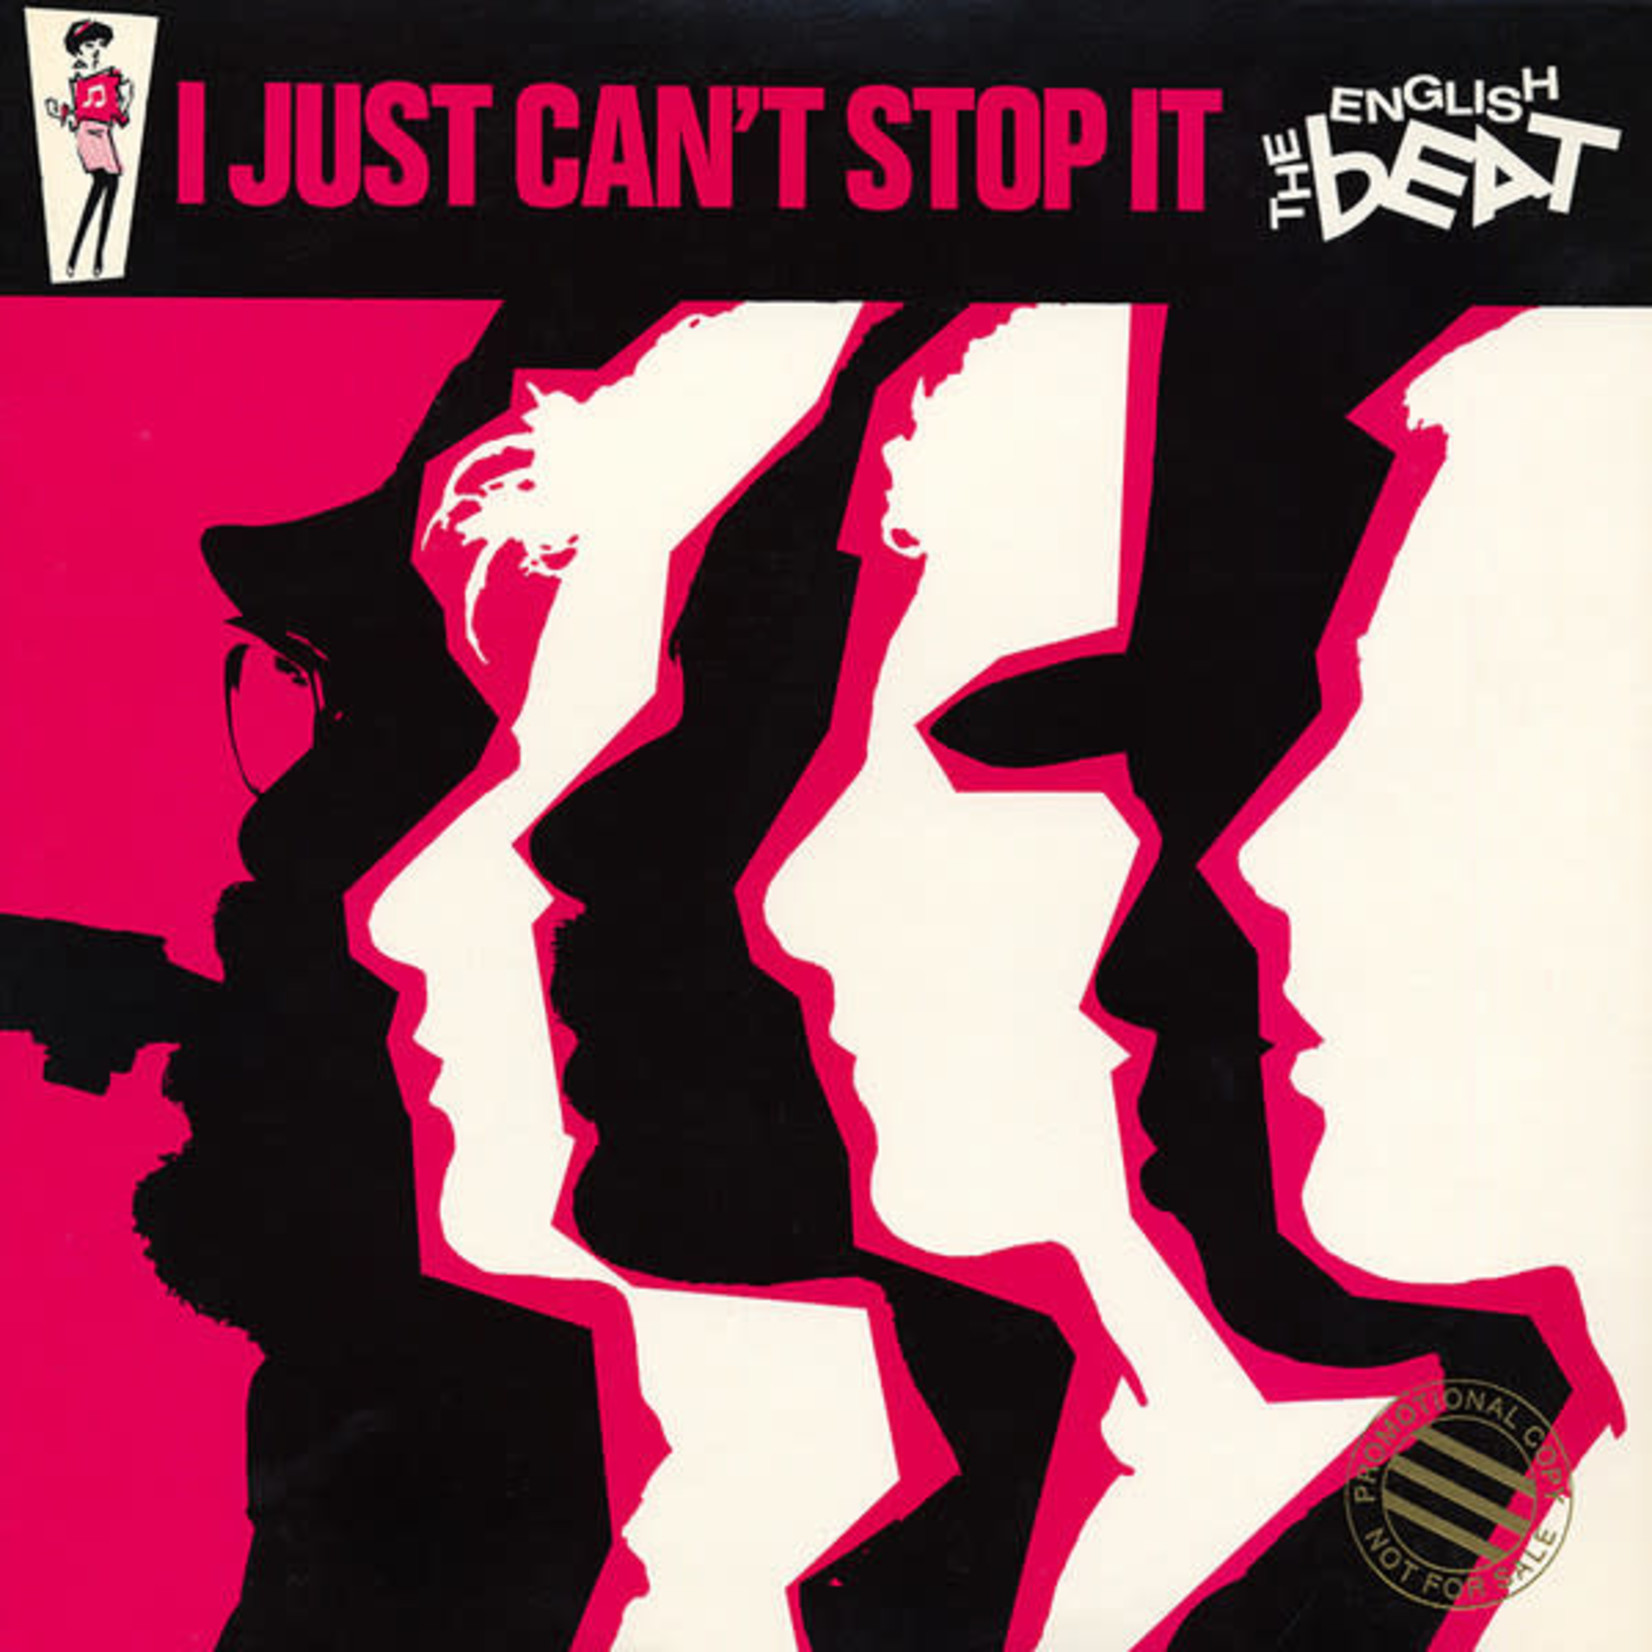 [Vintage] English Beat - I Just Can't Stop It